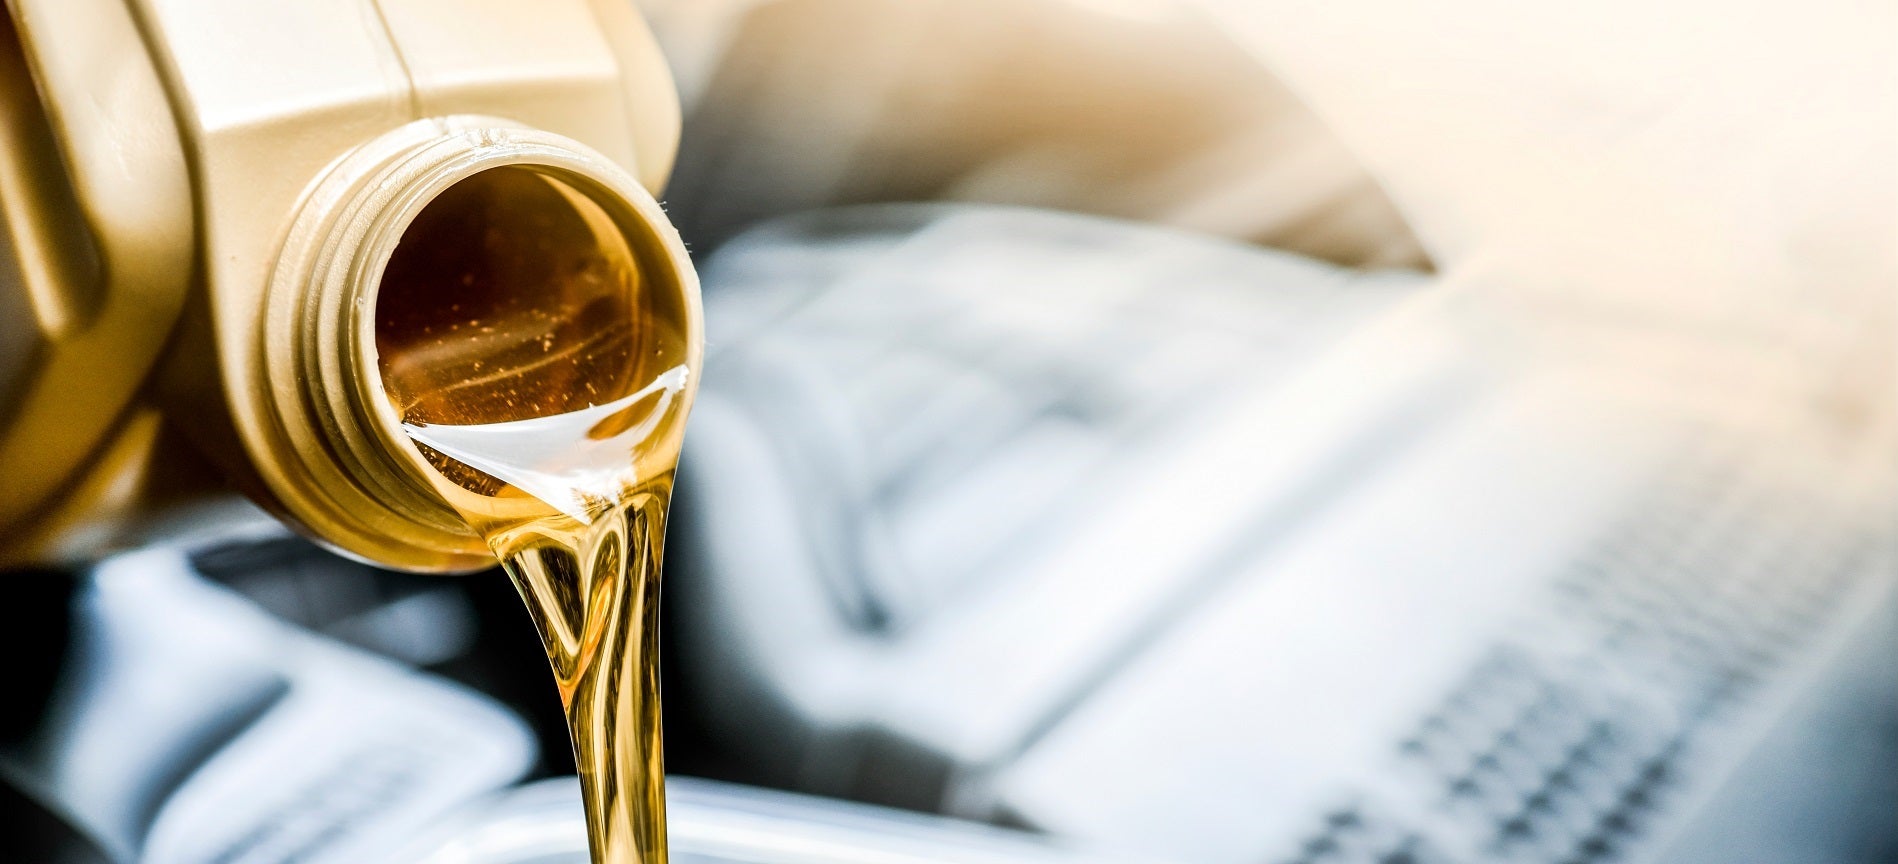 5 Signs You Need an Oil Change